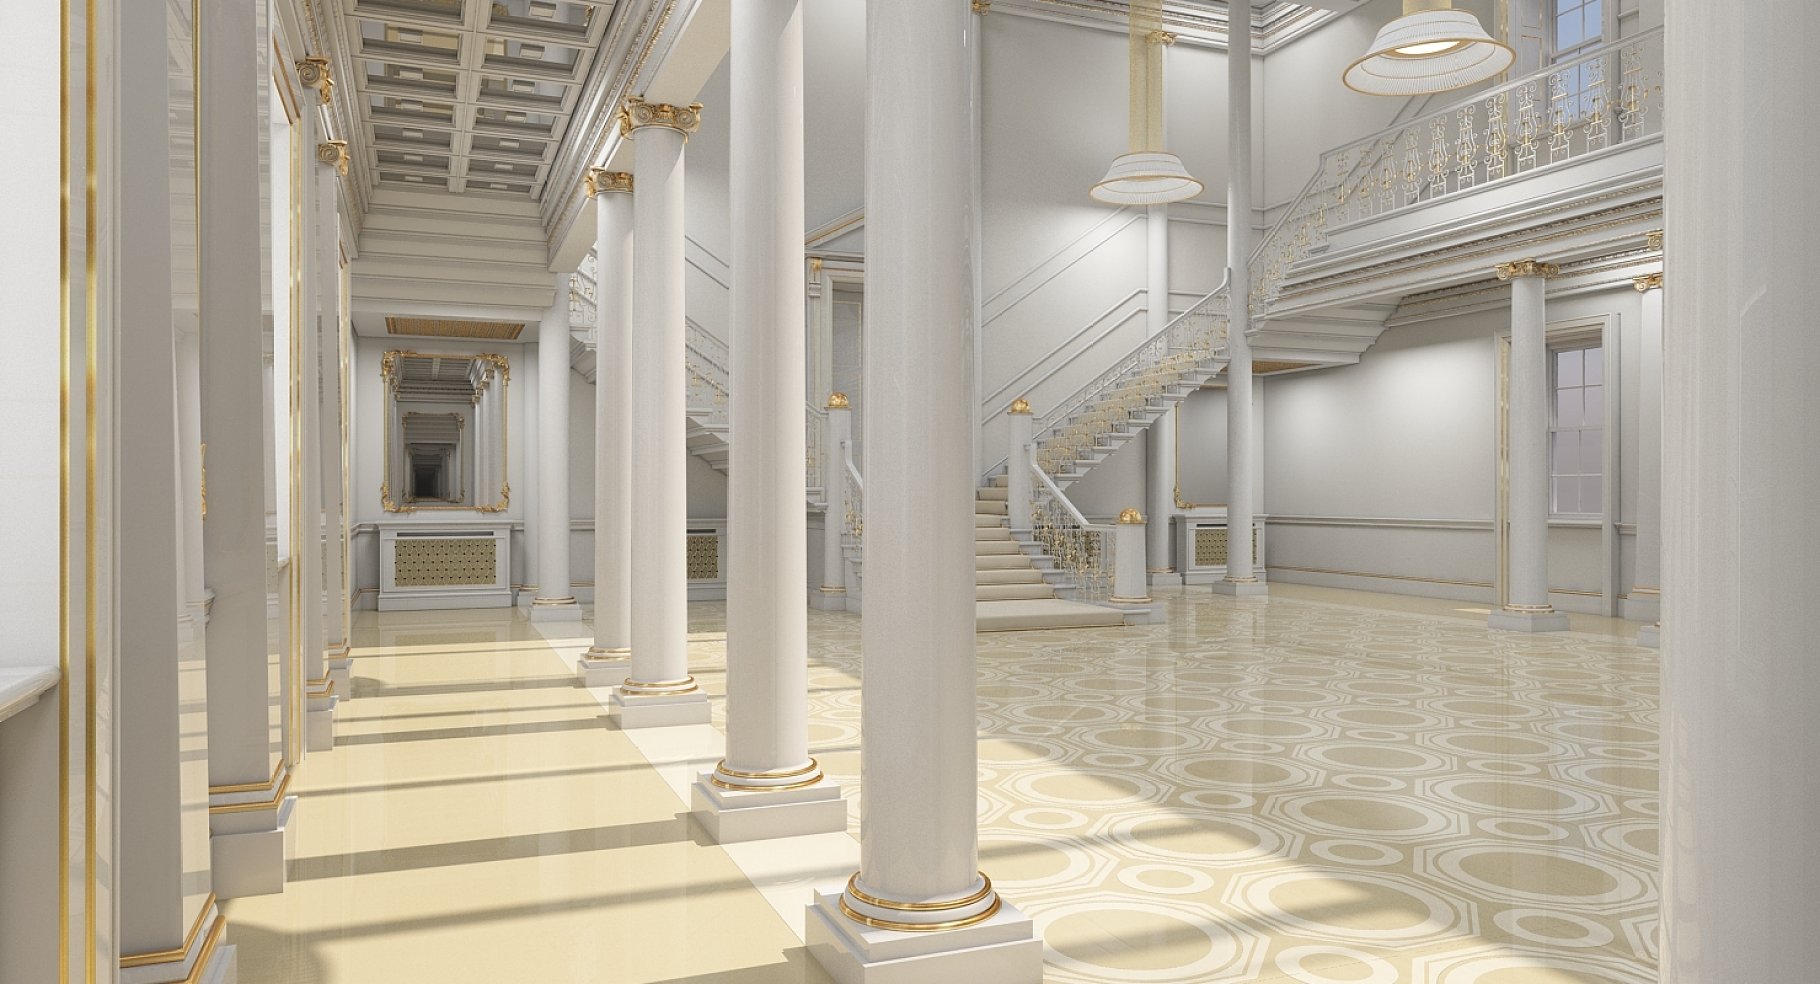 White columns with hall decorations.